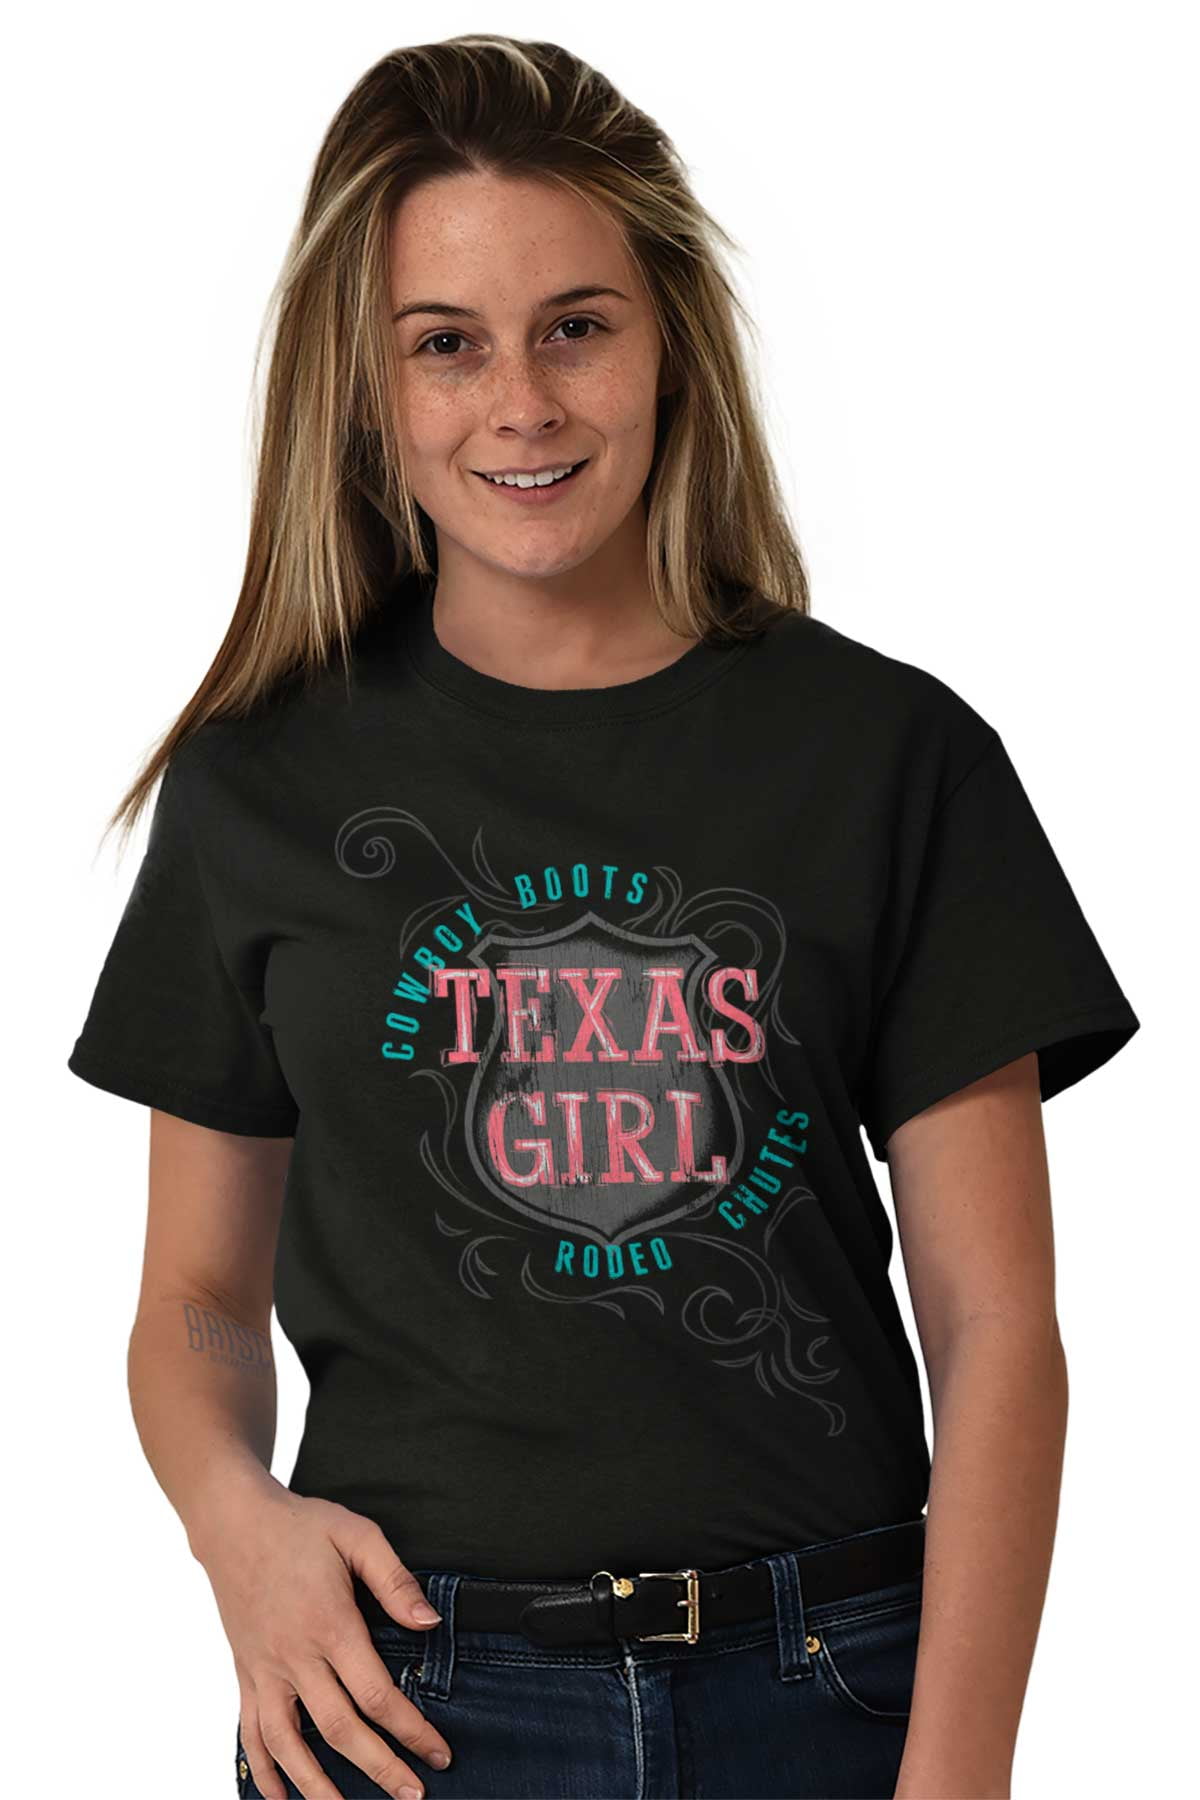 Cowgirl Ladies TShirts Tees T For Women Texas Girl Boots Rodeo Chutes ...